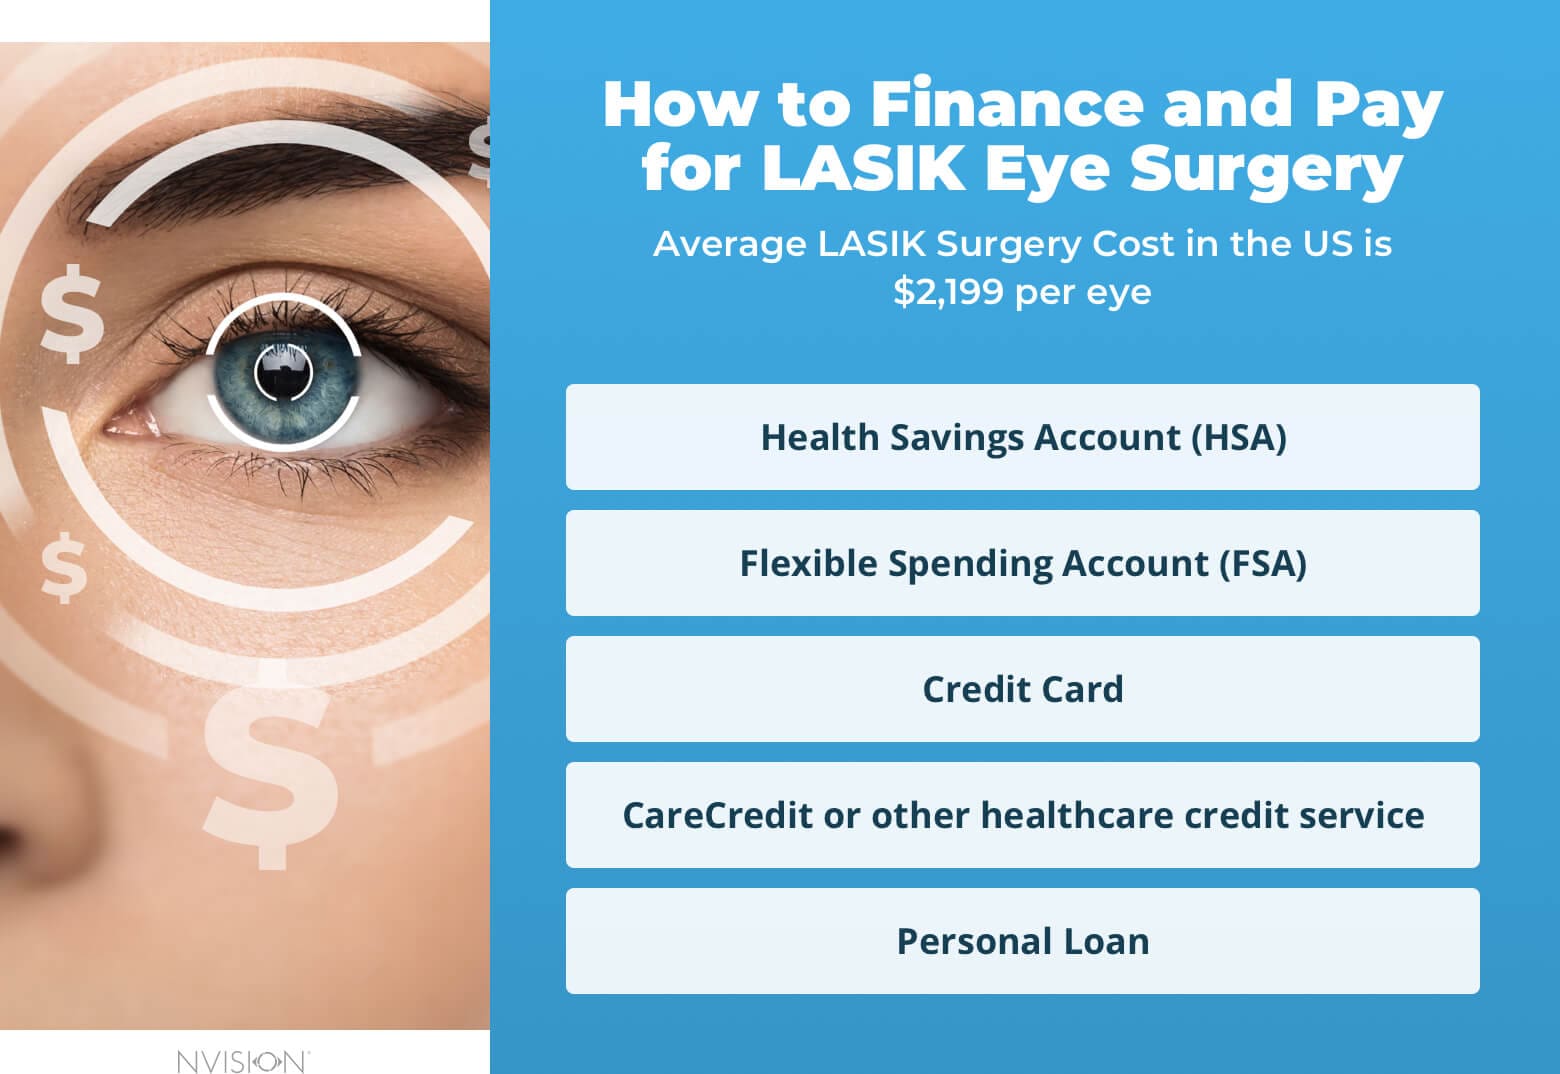 How to Finance and Pay for LASIK Eye Surgery